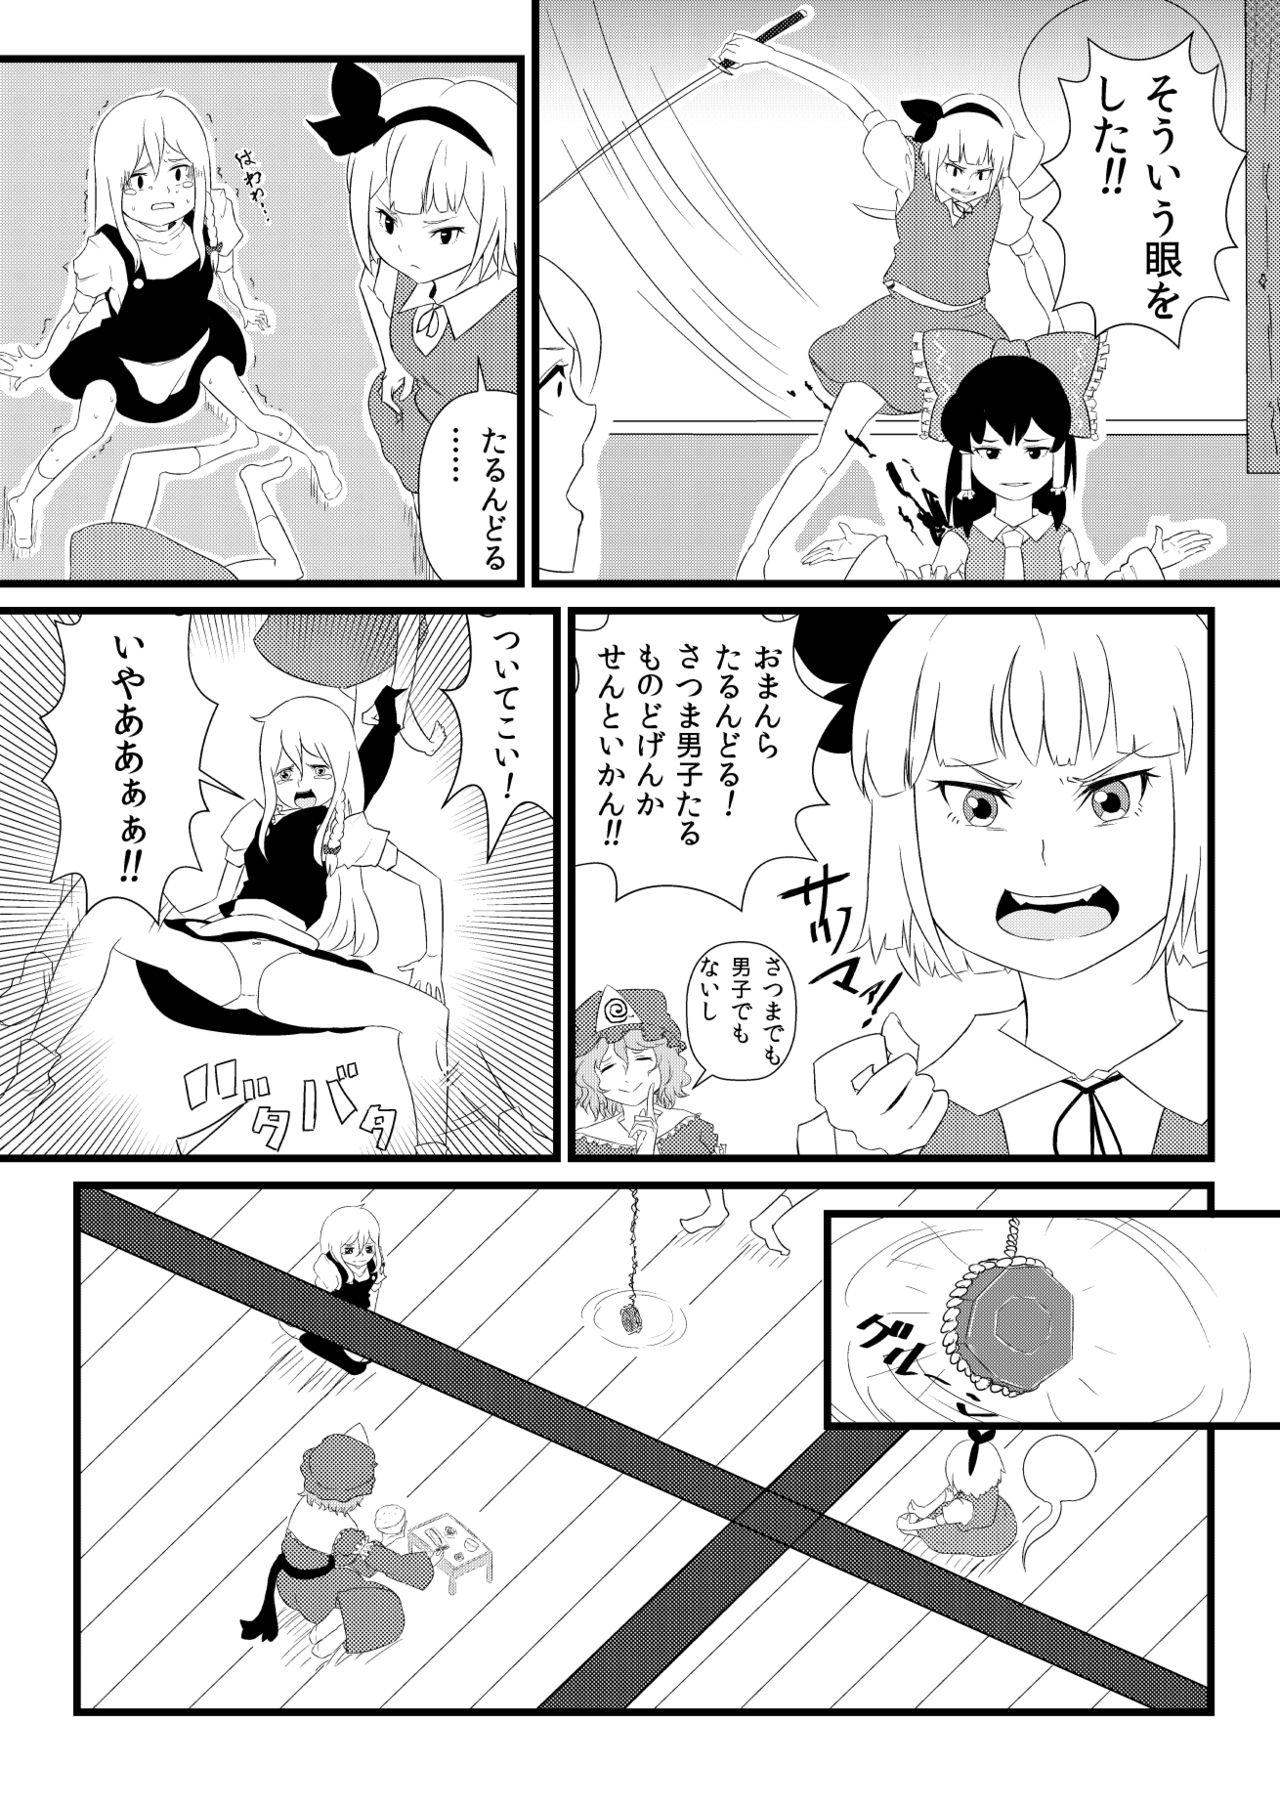 Deflowered 東方板としあき合同誌5 - Touhou project Lesbian - Page 3